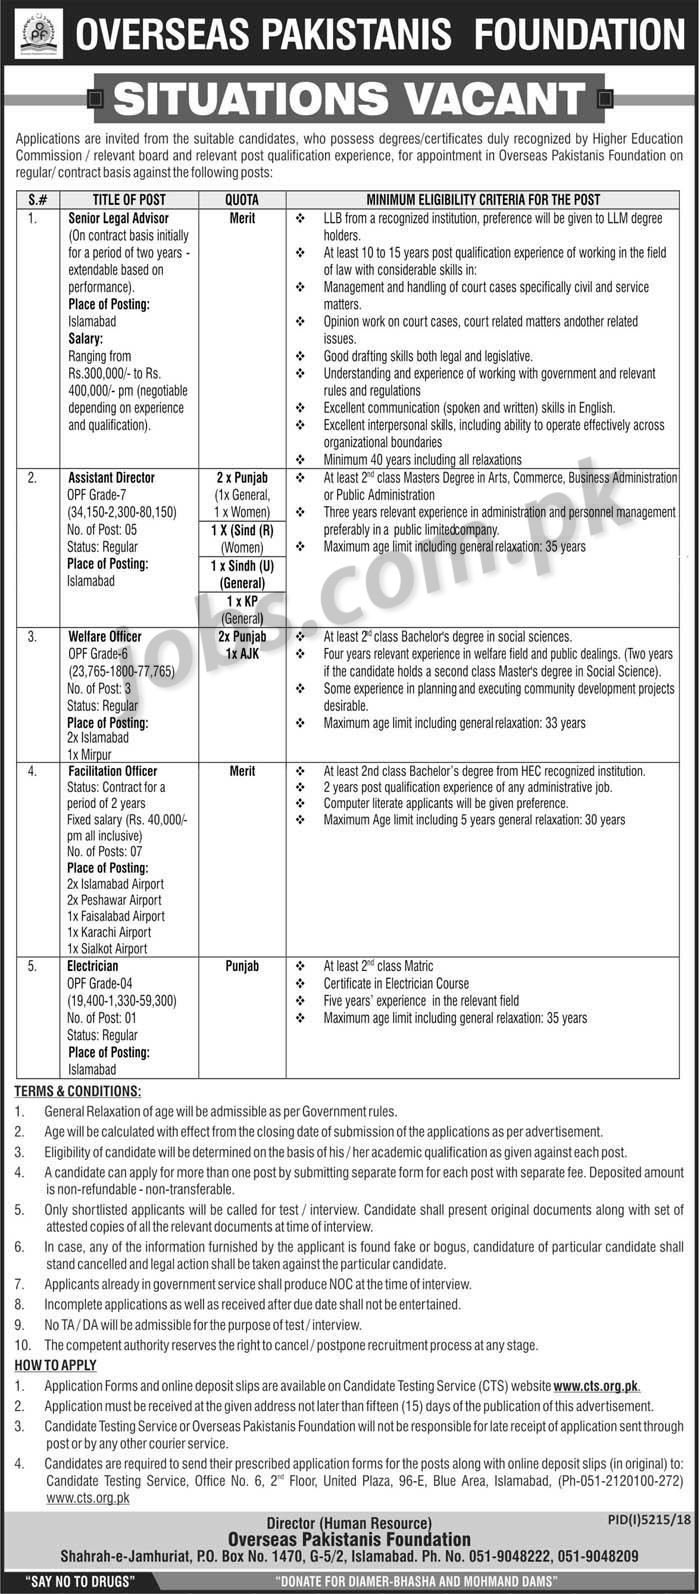 Overseas Pakistanis Foundation (OPF) Jobs 2019 for 17+ Welfare Officers, Facilitation Officers, Admin, Legal & Other Posts